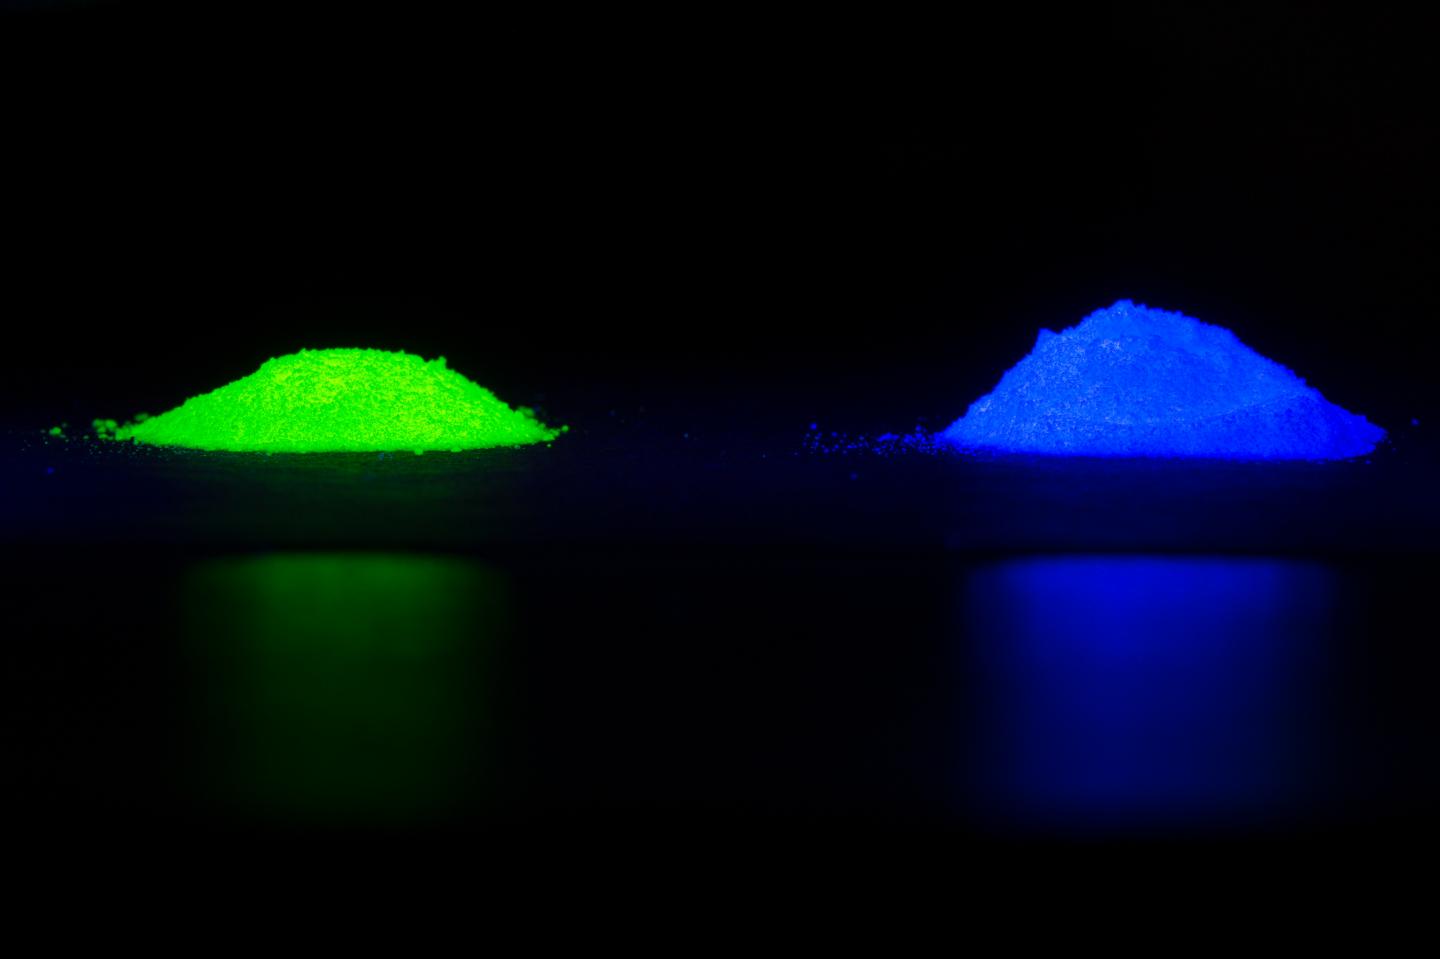 Under UV light, the SLAO phosphor emits either green-yellow or blue light depending on the chemical activator mixed in. Source: David Baillot/UC San Diego Jacobs School of Engineering